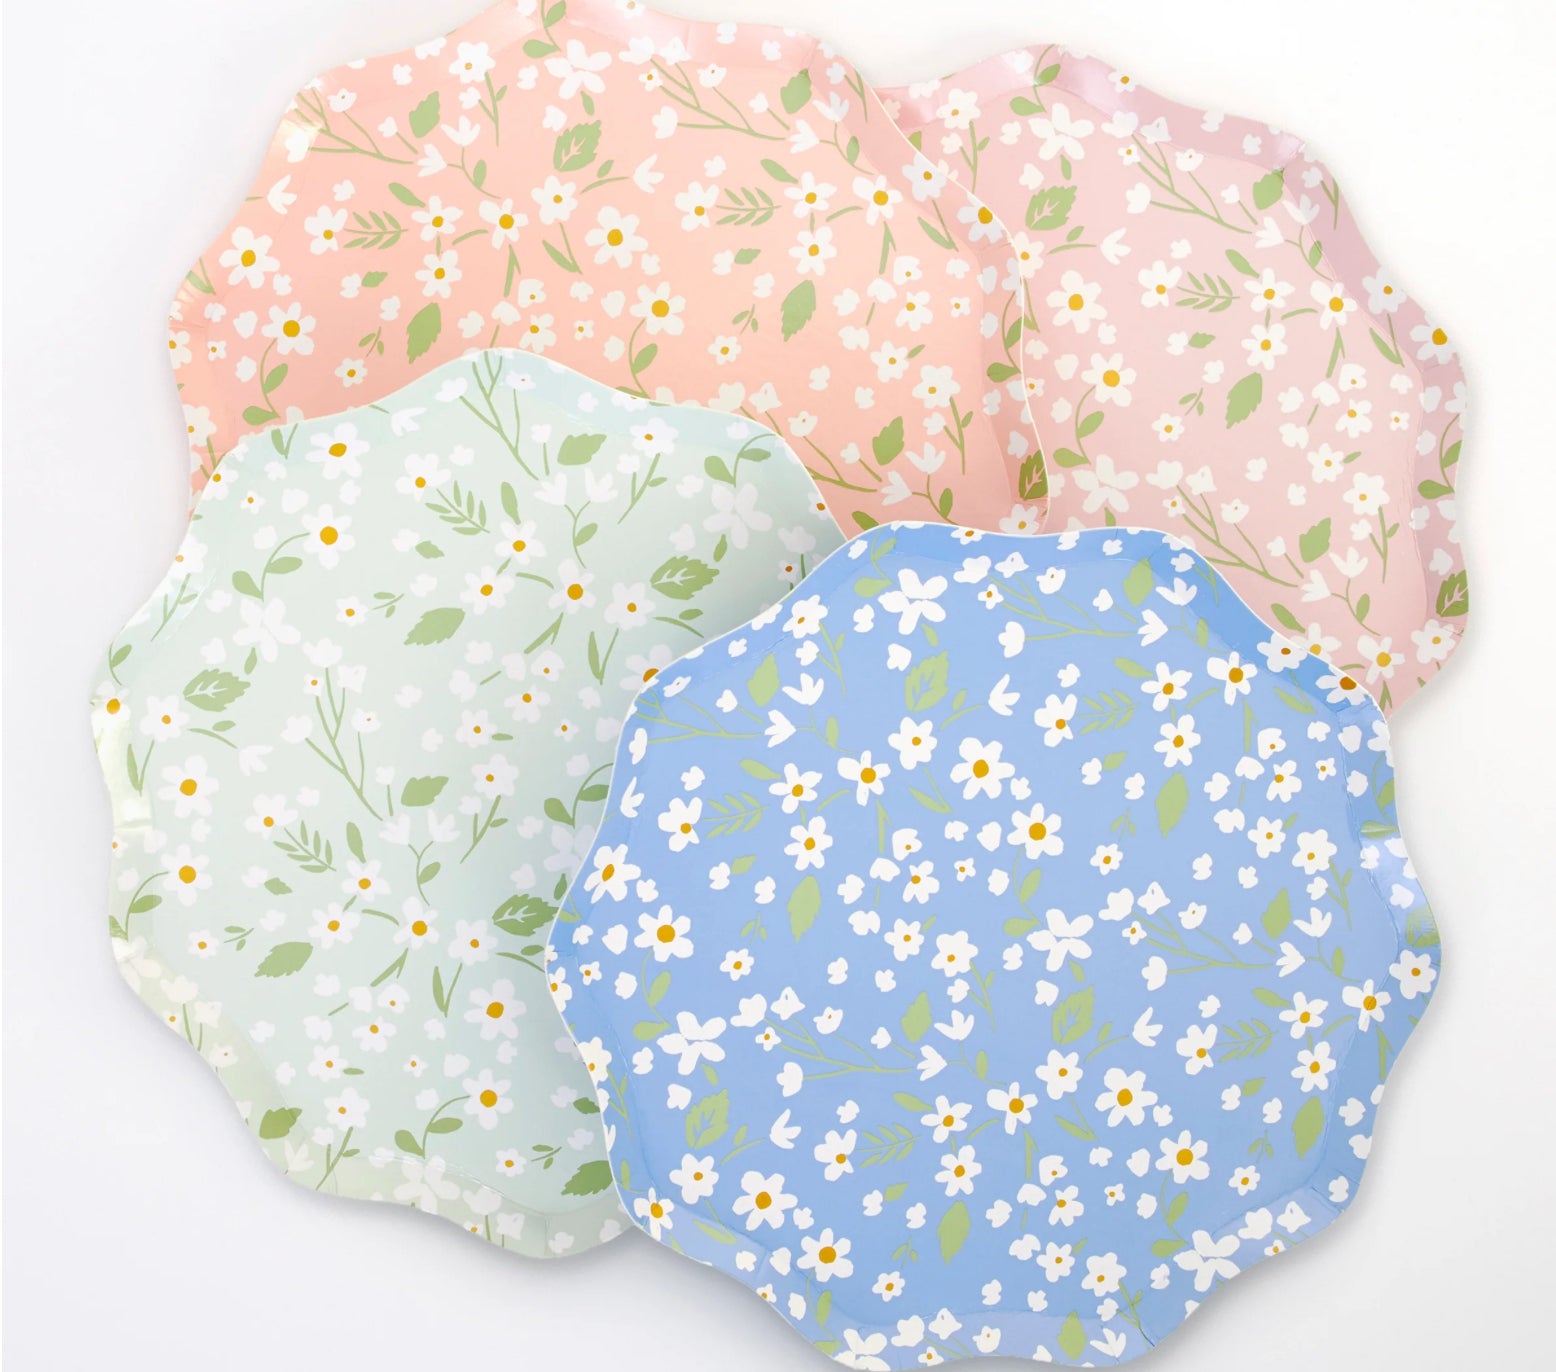 Ditsy Floral Dinner Paper Plates